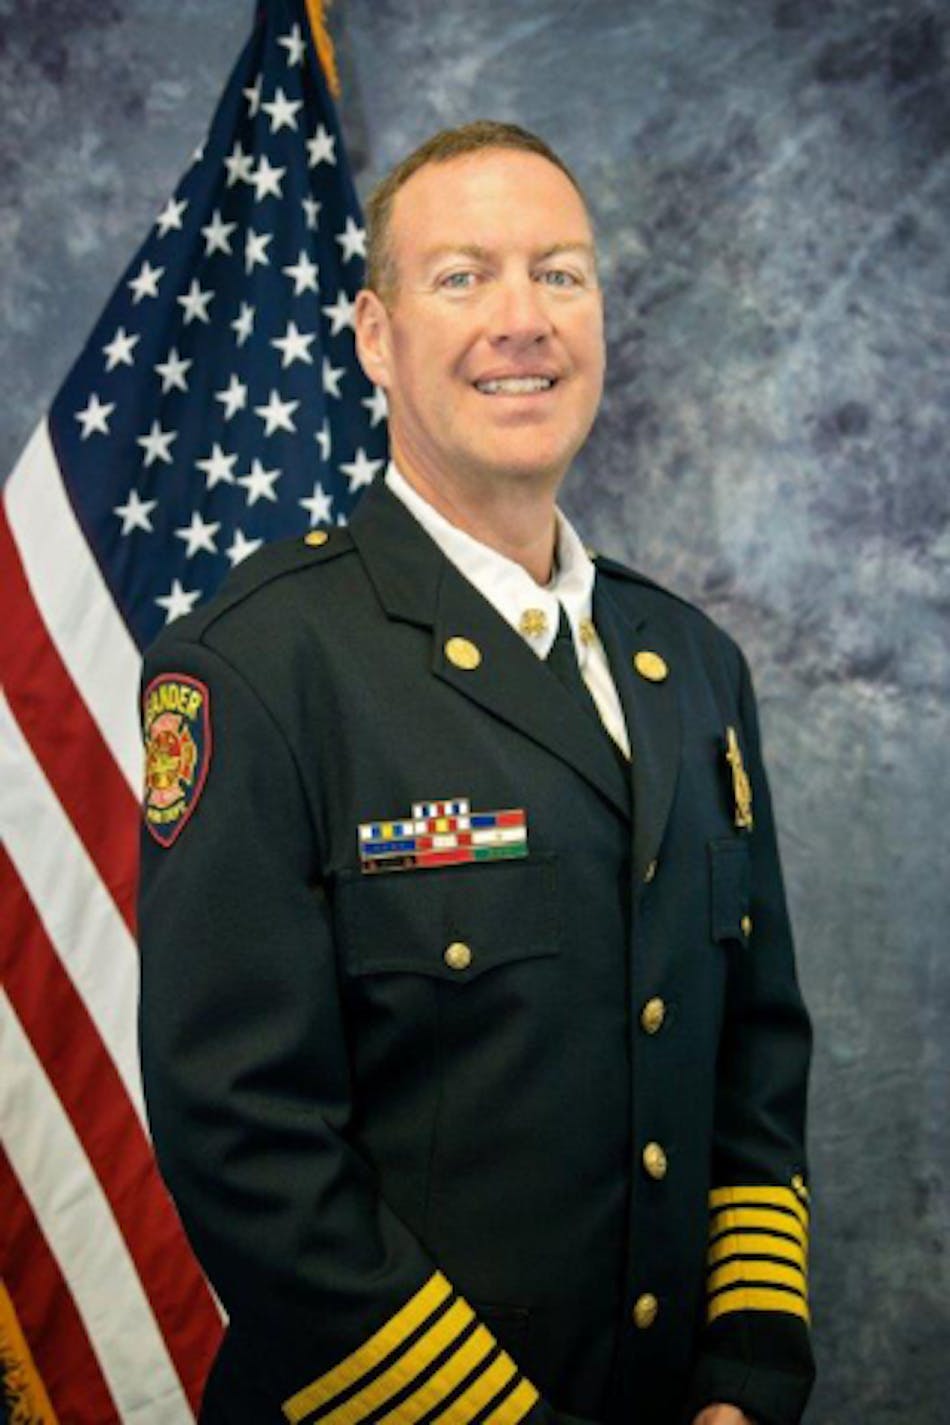 Bill Gardner, former chief of the Leander, TX, Fire Department, has been hired as Director of Fire Products for ESO.